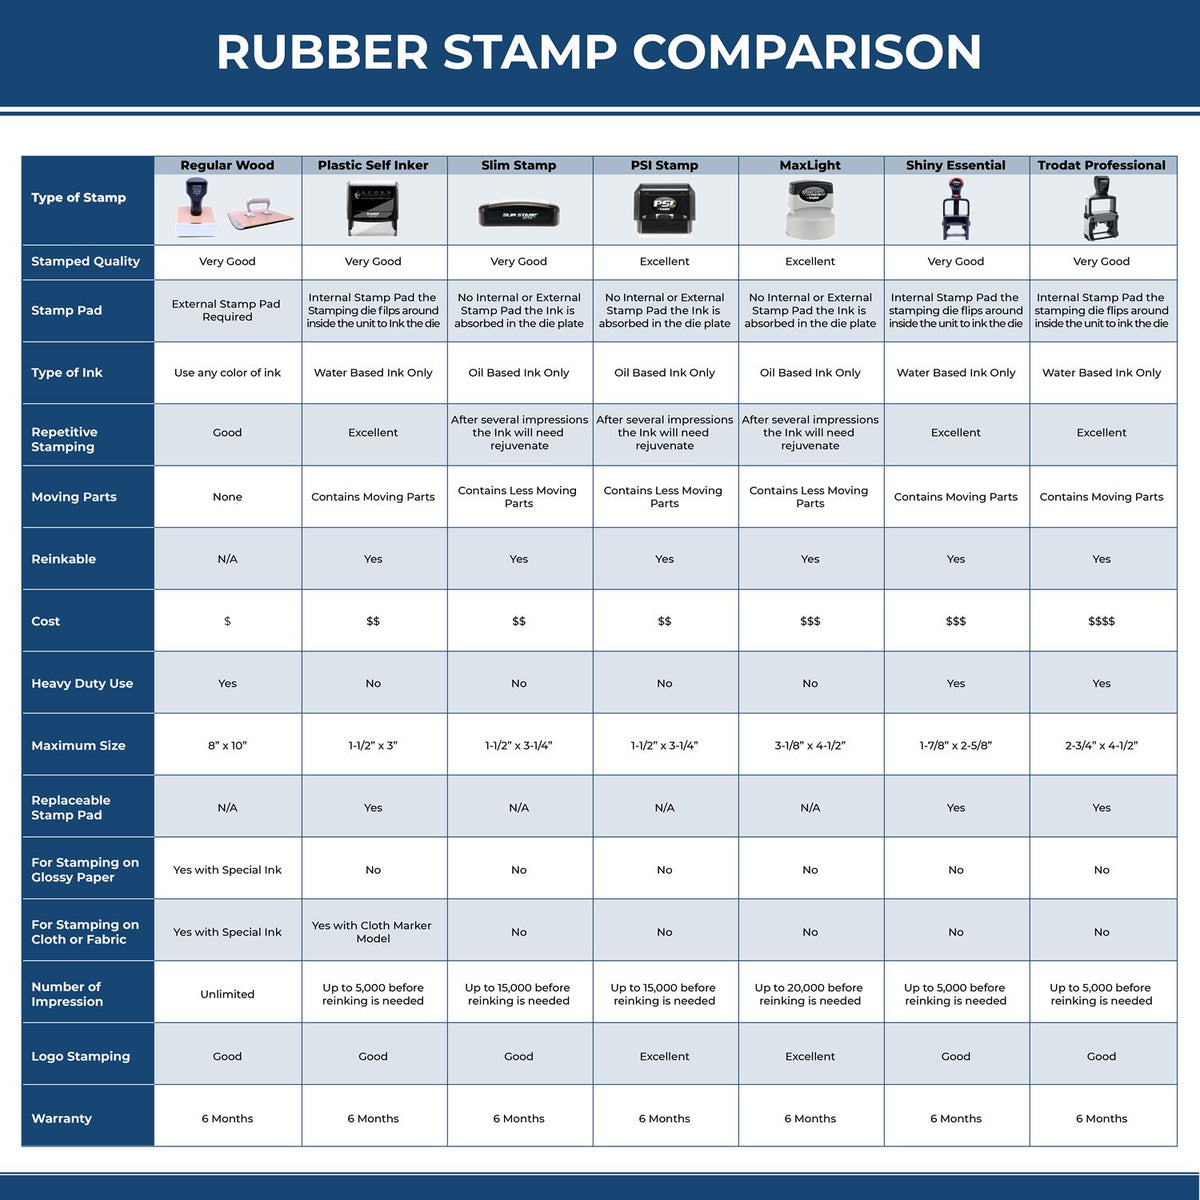 Large Workers Comp Rubber Stamp 4527R Rubber Stamp Comparison